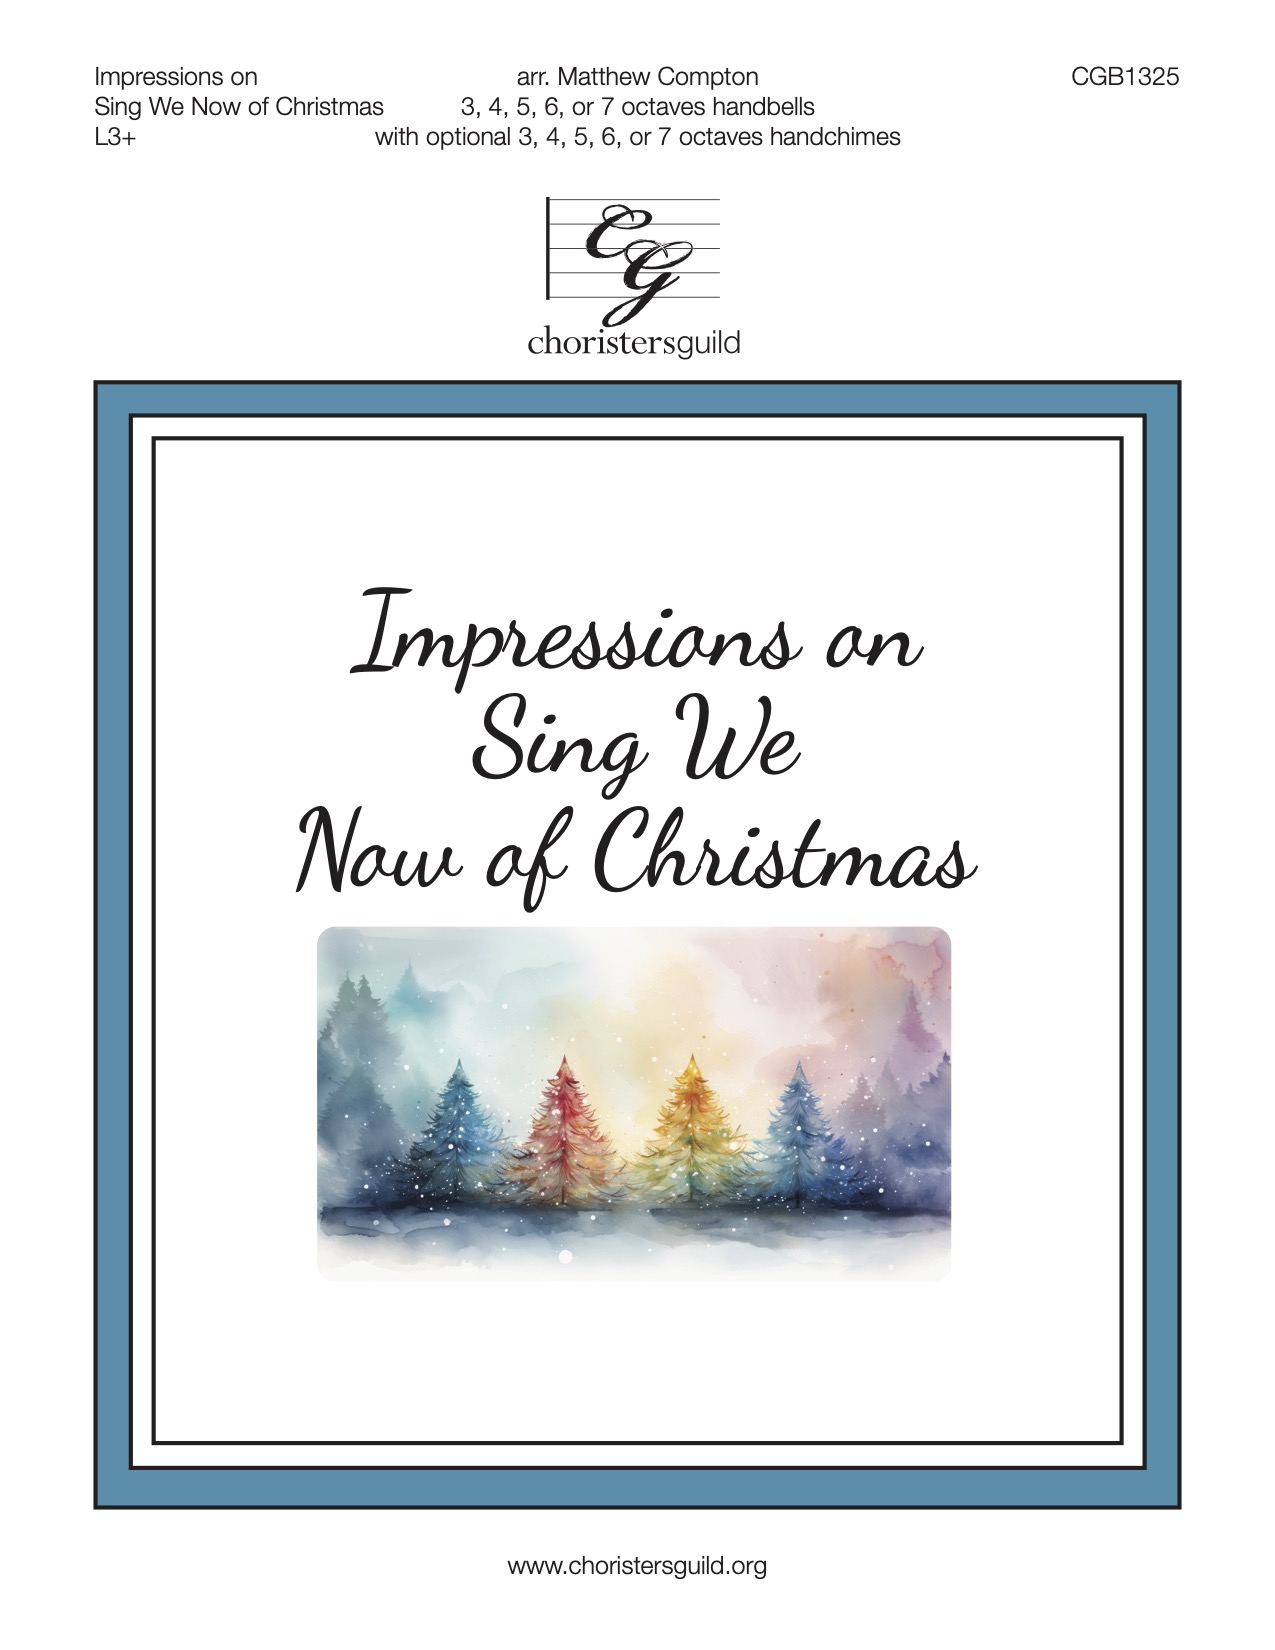 Impressions on Sing We Now of Christmas